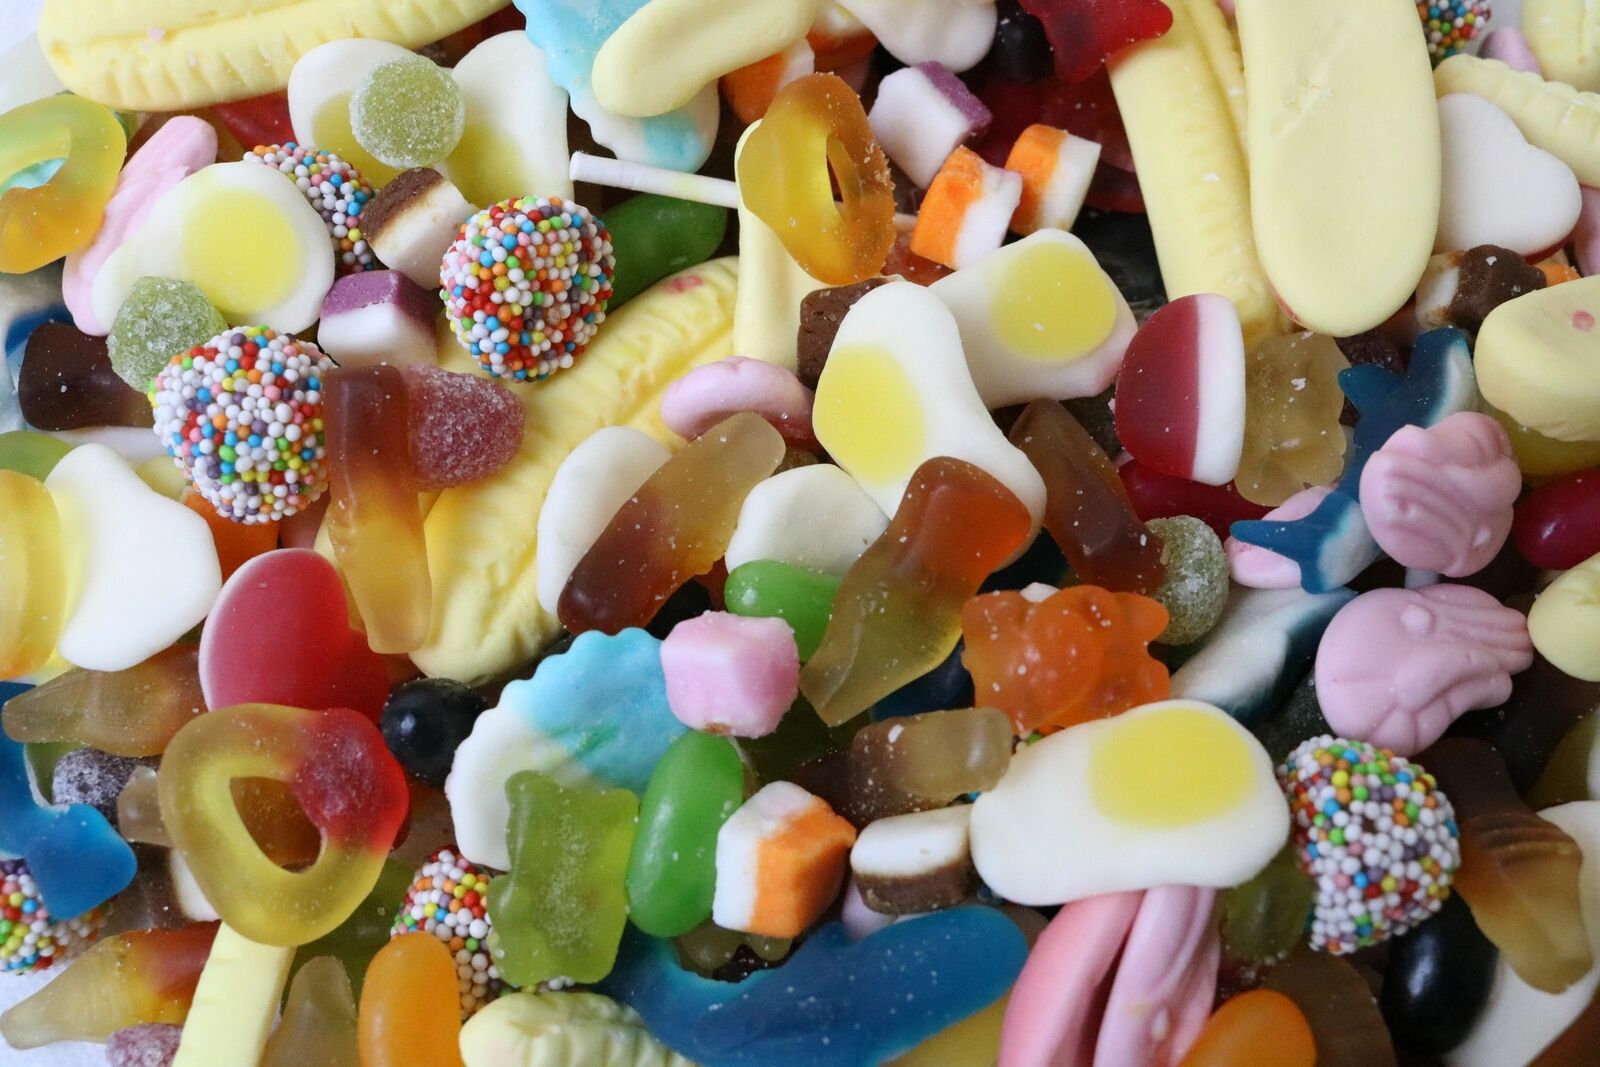 Pick n Mix Sweets - Assortment Of Pick n Mix Party Sweets (1kg) - Heat Damage